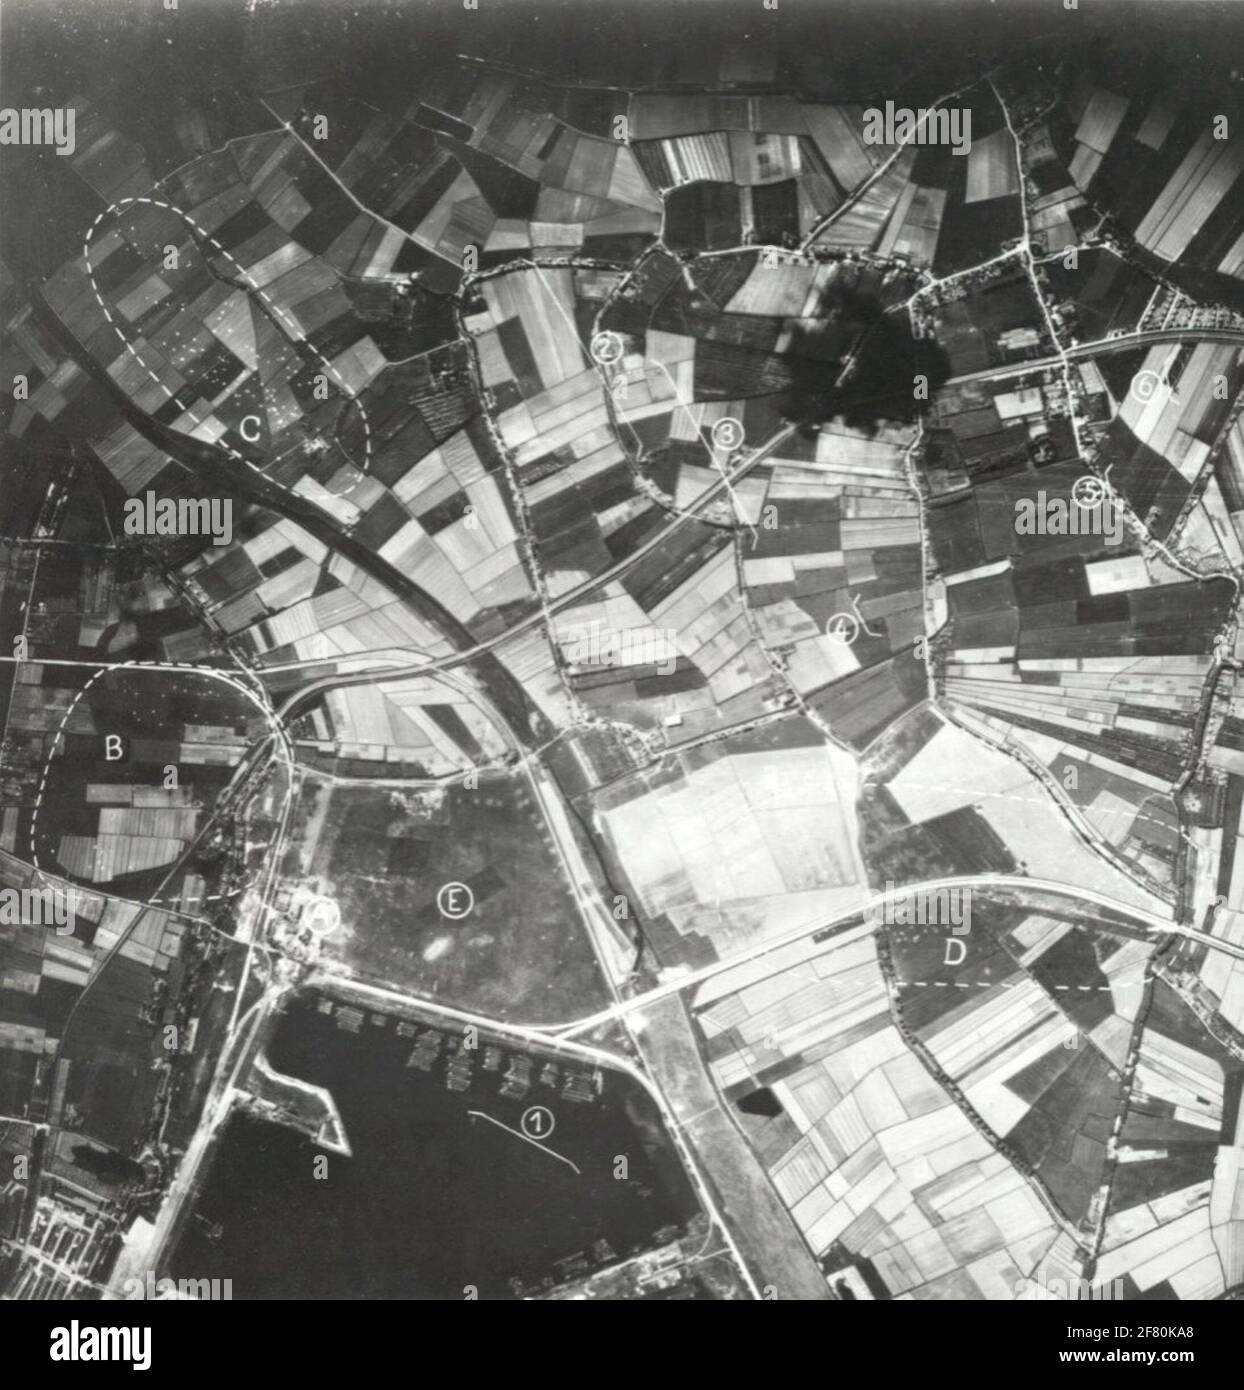 Waalhaven airport shortly after the German attack on 10 May 1940. On the ground in the circled areas, clearly visible the parachutes of the German paratroopers. Stock Photo